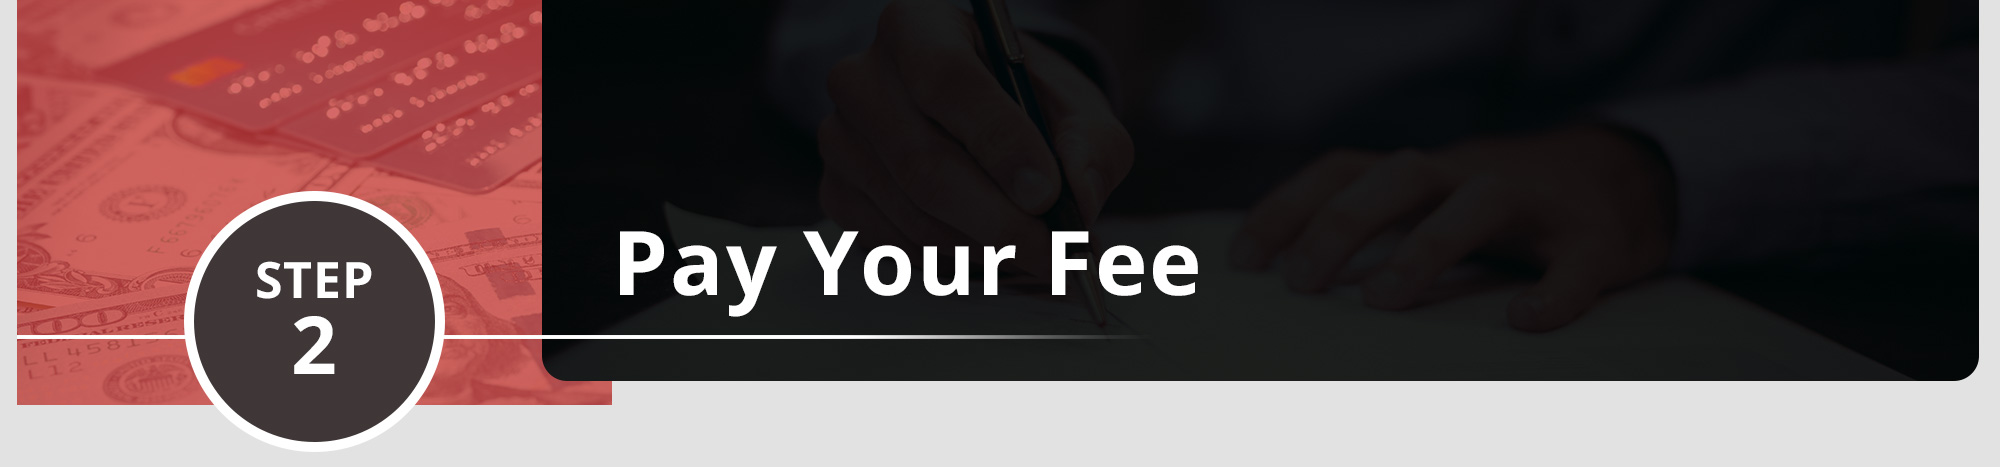 Pay Your Fee